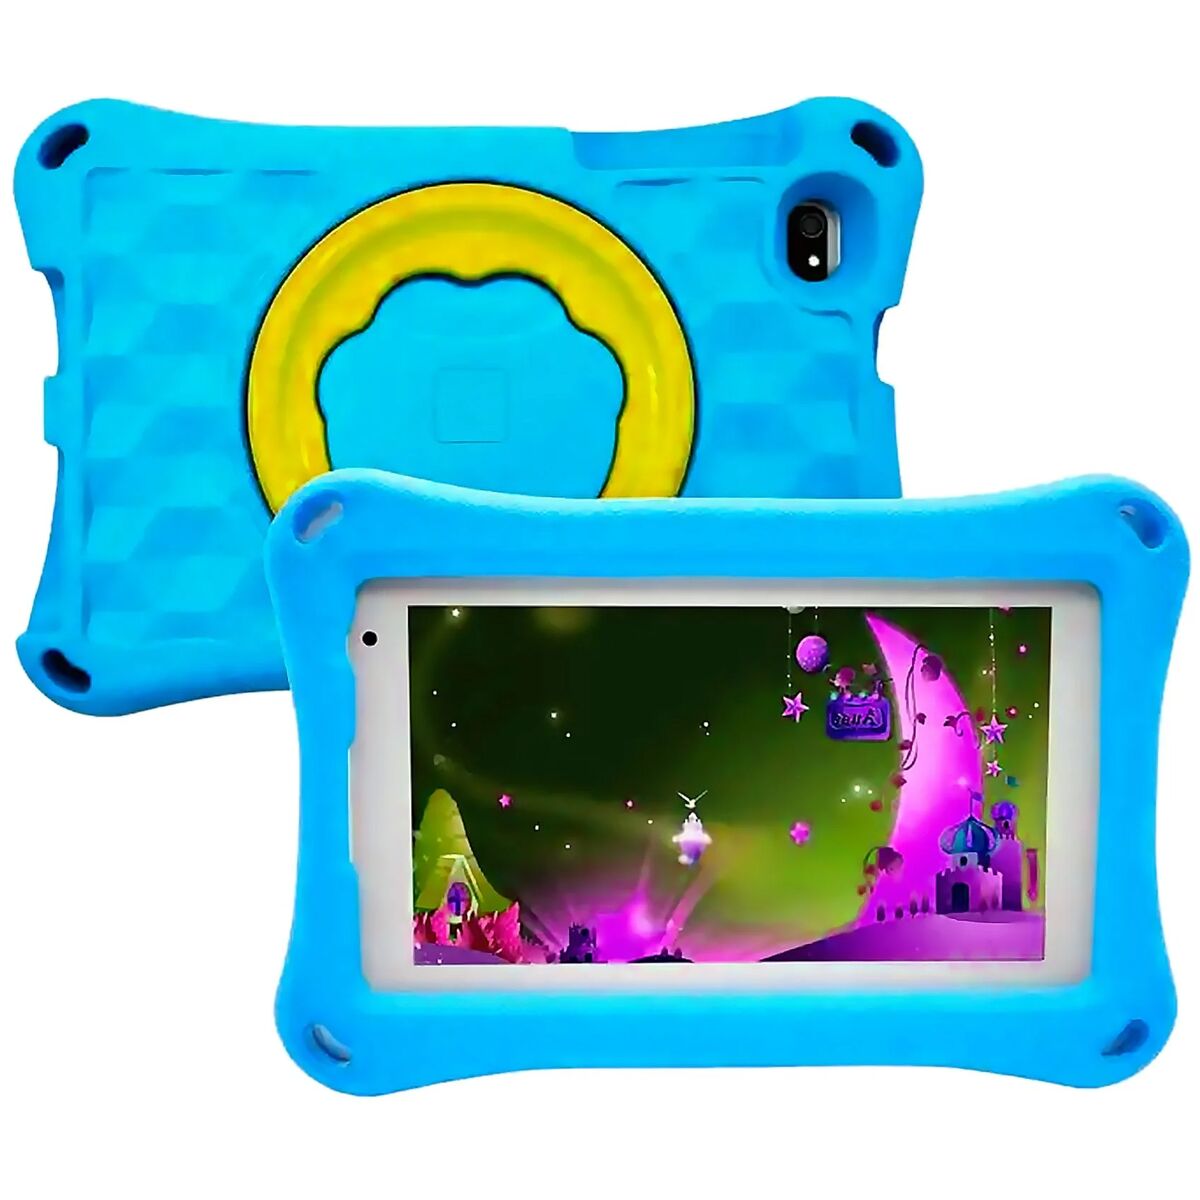 Interactive Tablet for Children K714 Blue 32 GB 2 GB RAM 7", BigBuy Tech, Toys and games, Electronic toys, interactive-tablet-for-children-k714-blue-32-gb-2-gb-ram-7, Brand_BigBuy Tech, category-reference-2609, category-reference-2617, category-reference-2626, category-reference-t-11190, category-reference-t-11203, category-reference-t-11206, category-reference-t-19663, Condition_NEW, entertainment, para los más peques, Price_100 - 200, telephones & tablets, vuelta al cole, RiotNook